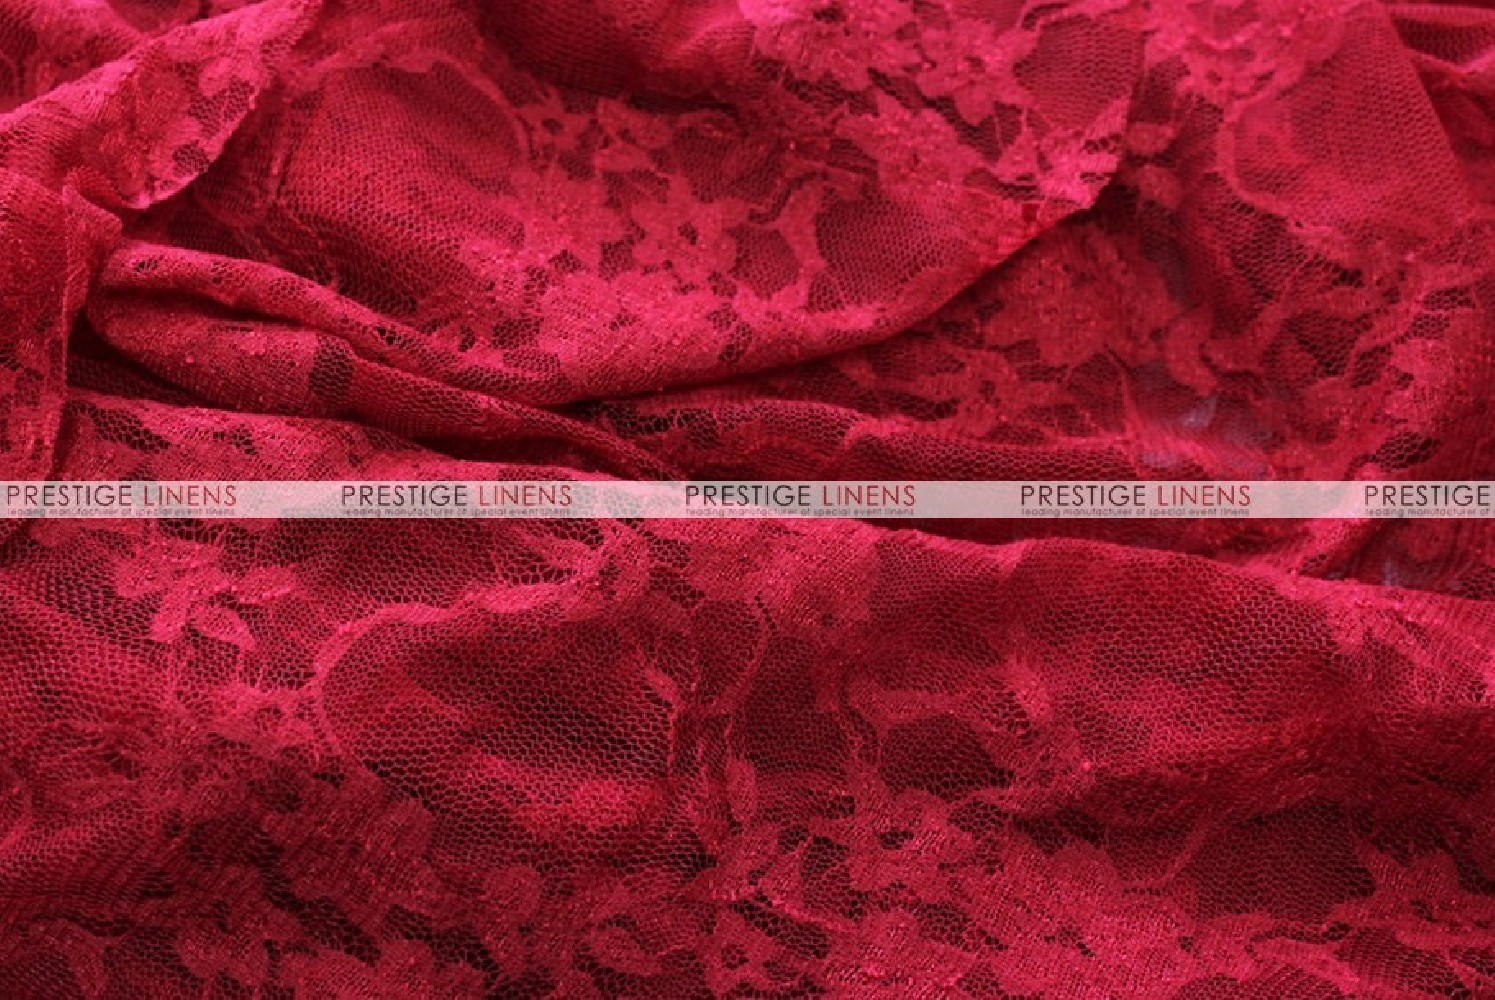 Victorian Stretch Lace - Fabric by the yard - Charcoal